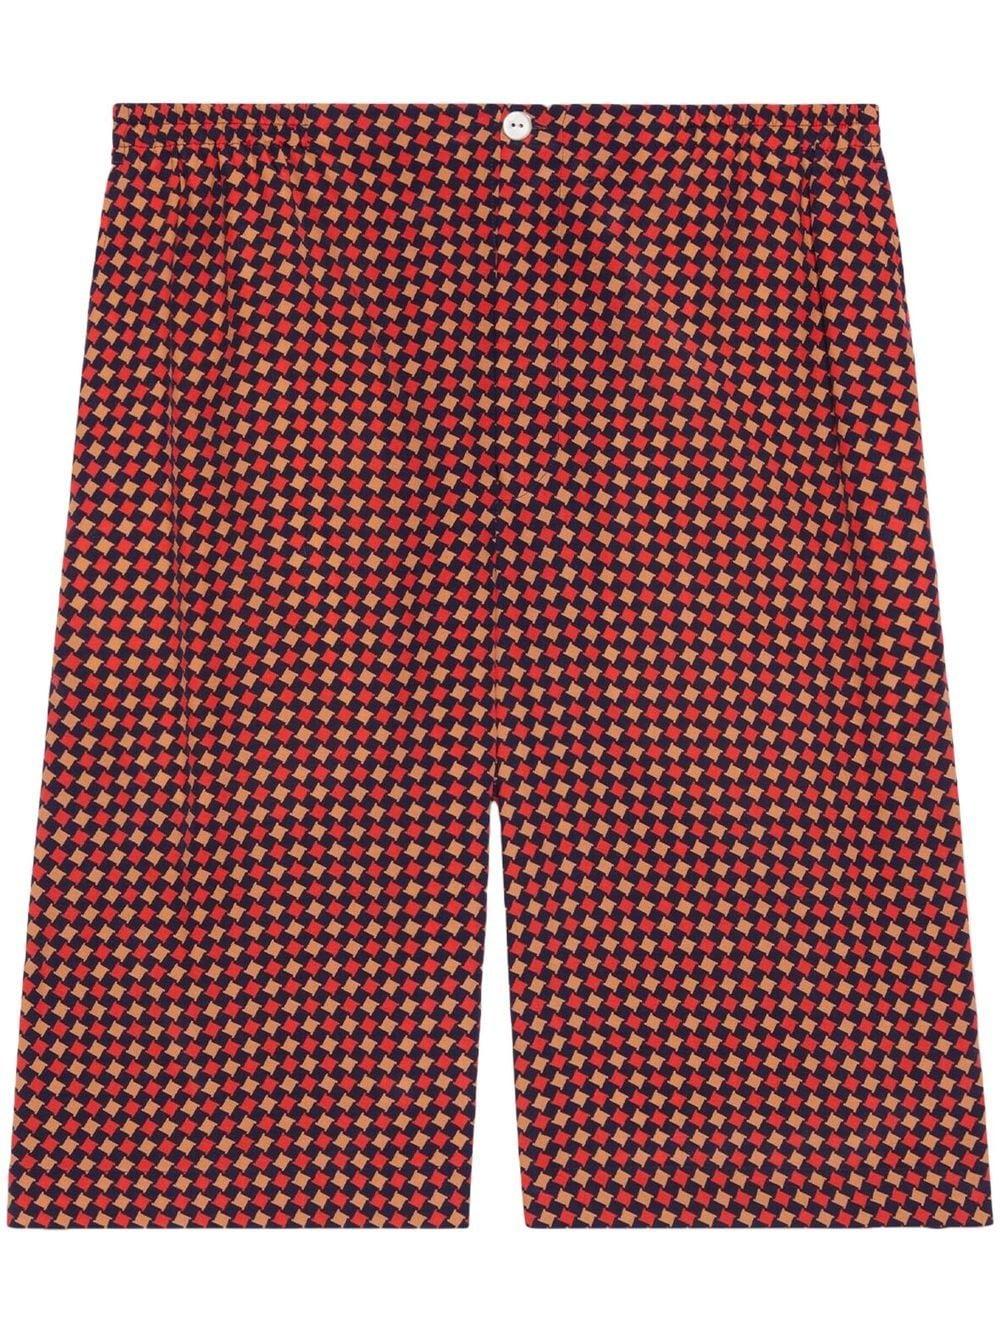 GUCCI Men's Multicolor Houndstooth Bermuda Shorts for SS23